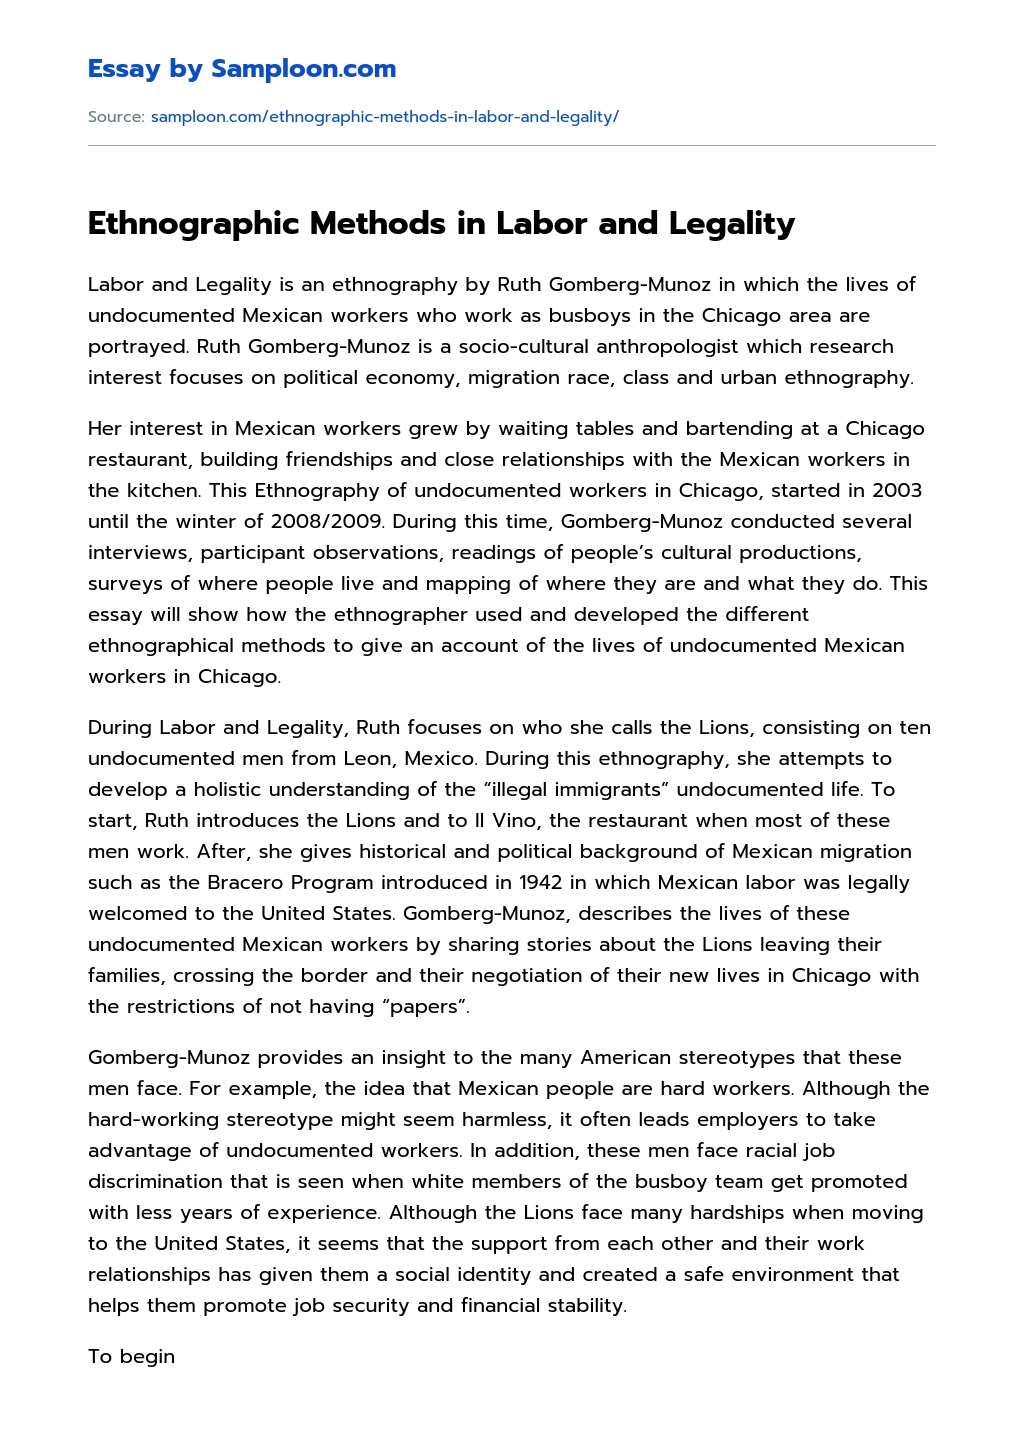 Ethnographic Methods in Labor and Legality Research Paper essay